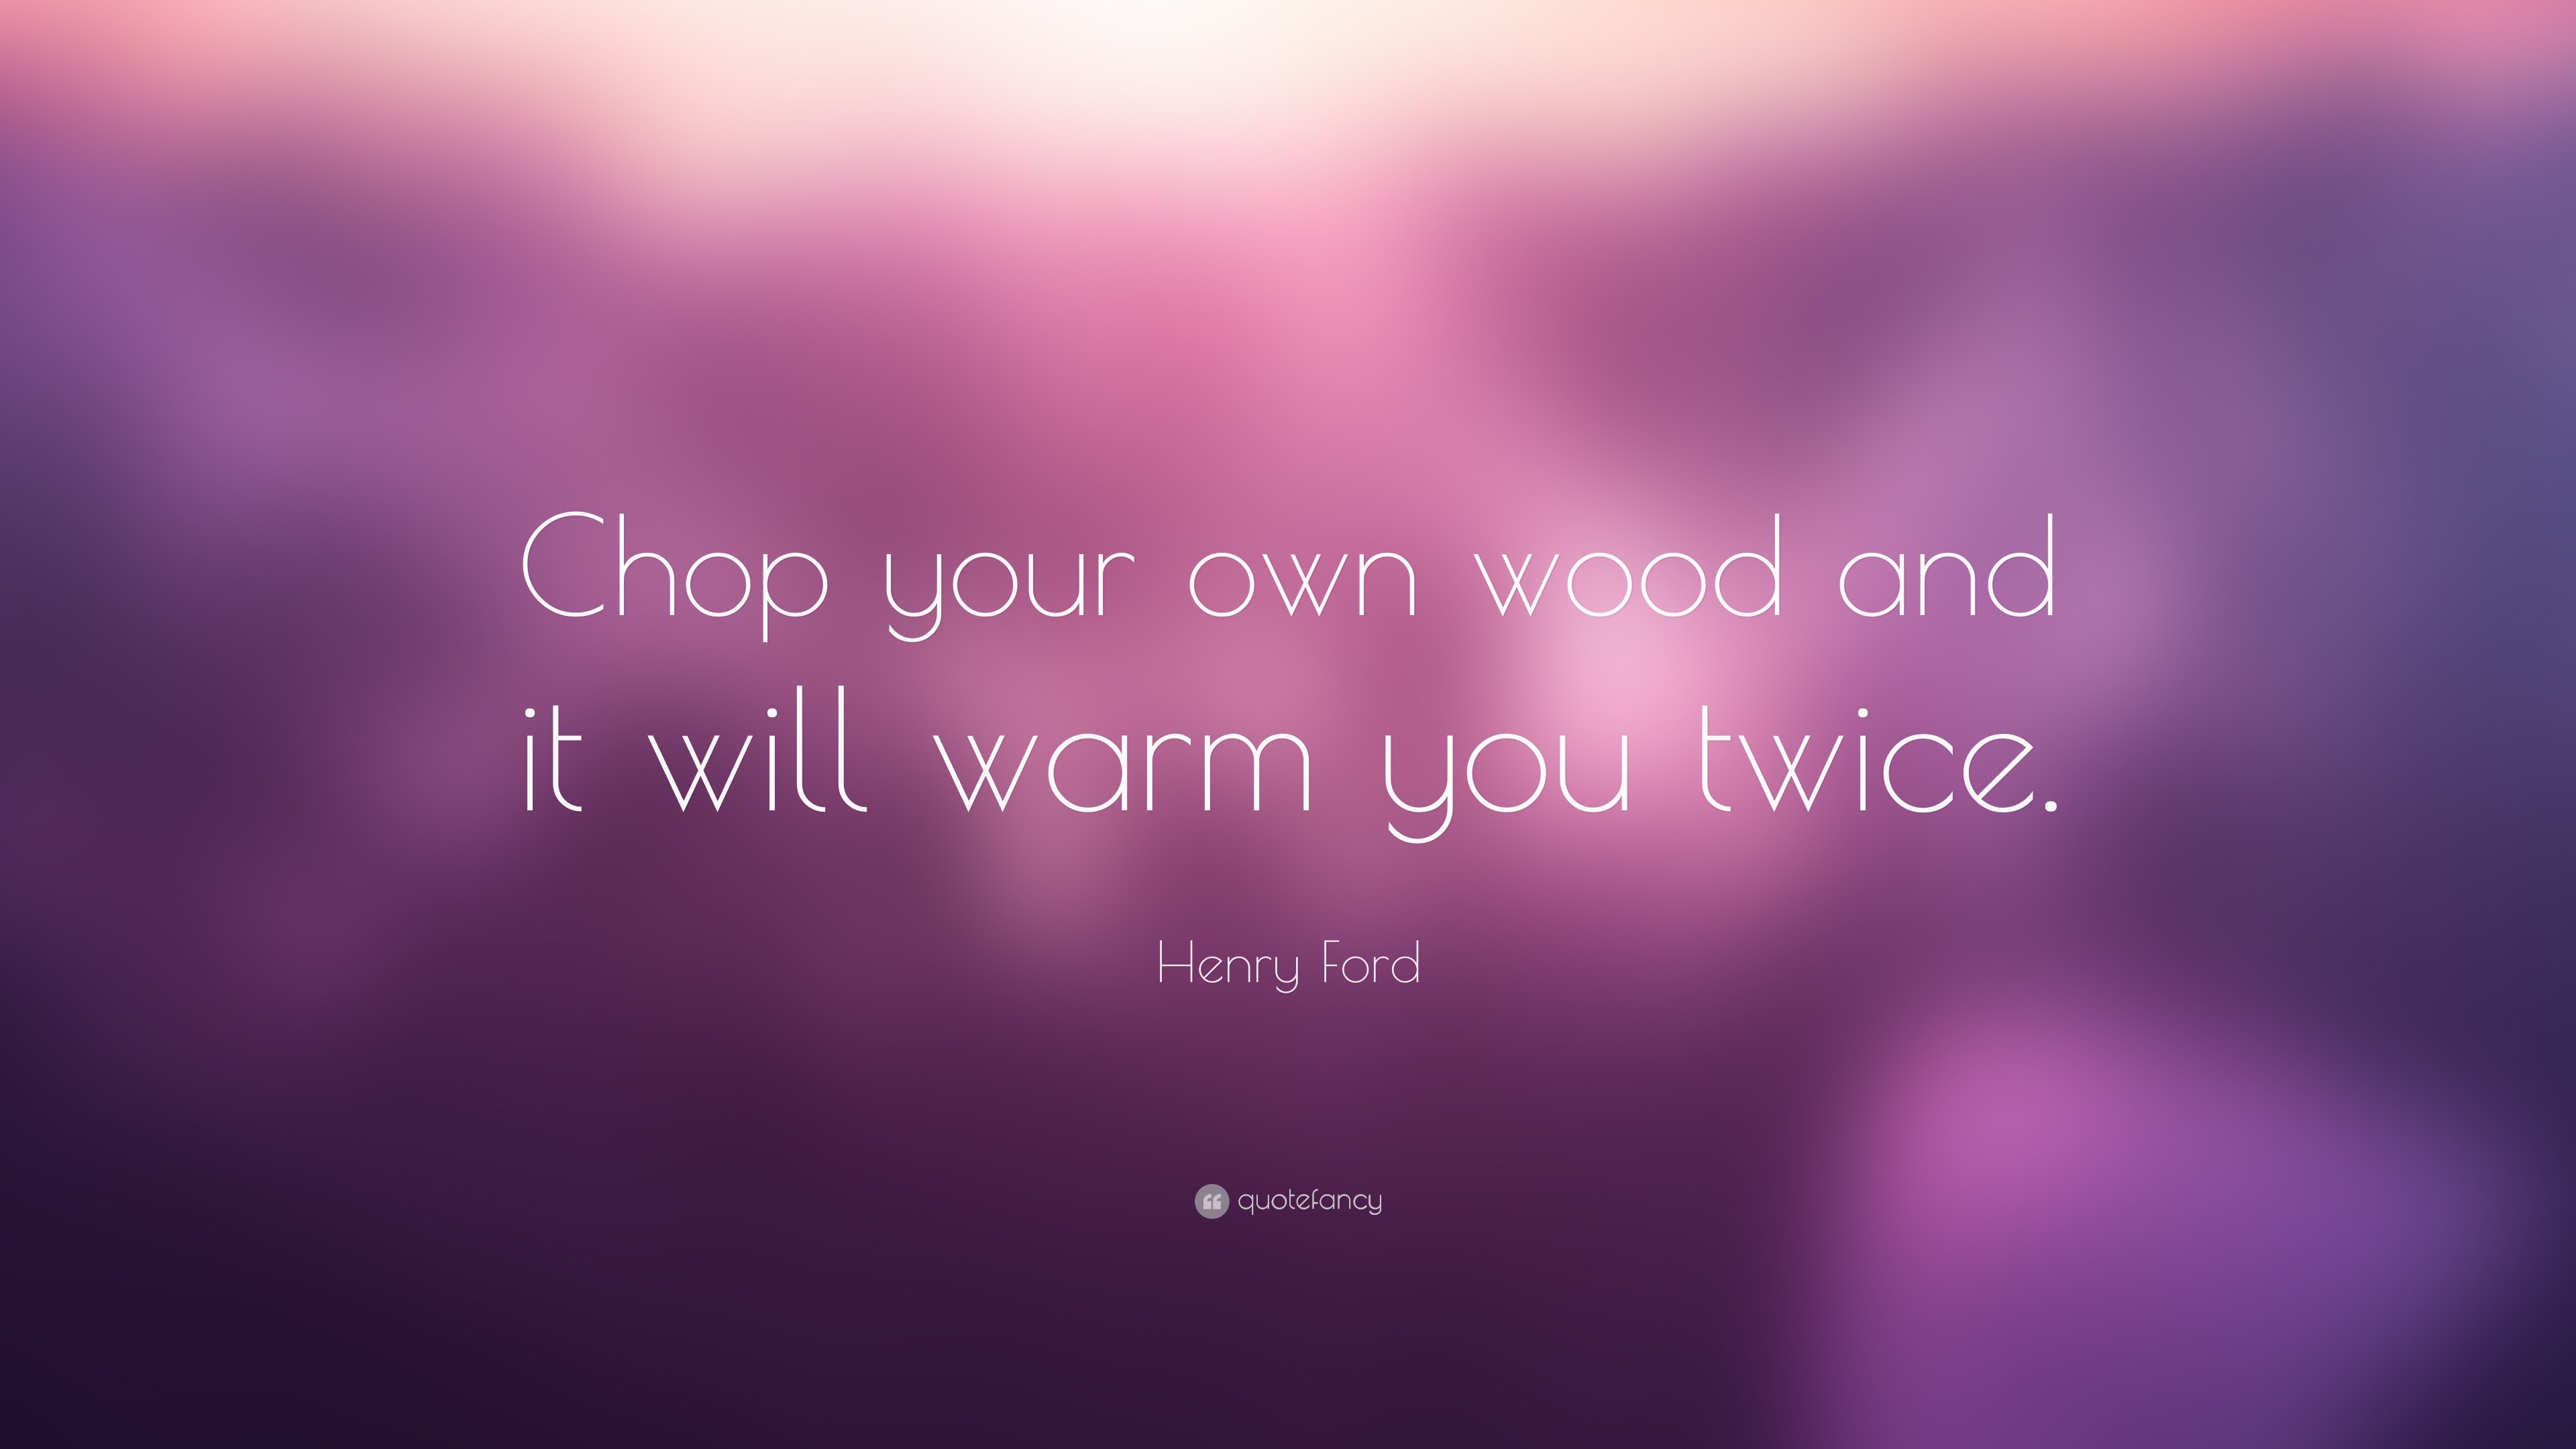 Henry Ford Quote: “Chop your own wood and it will warm you twice.”